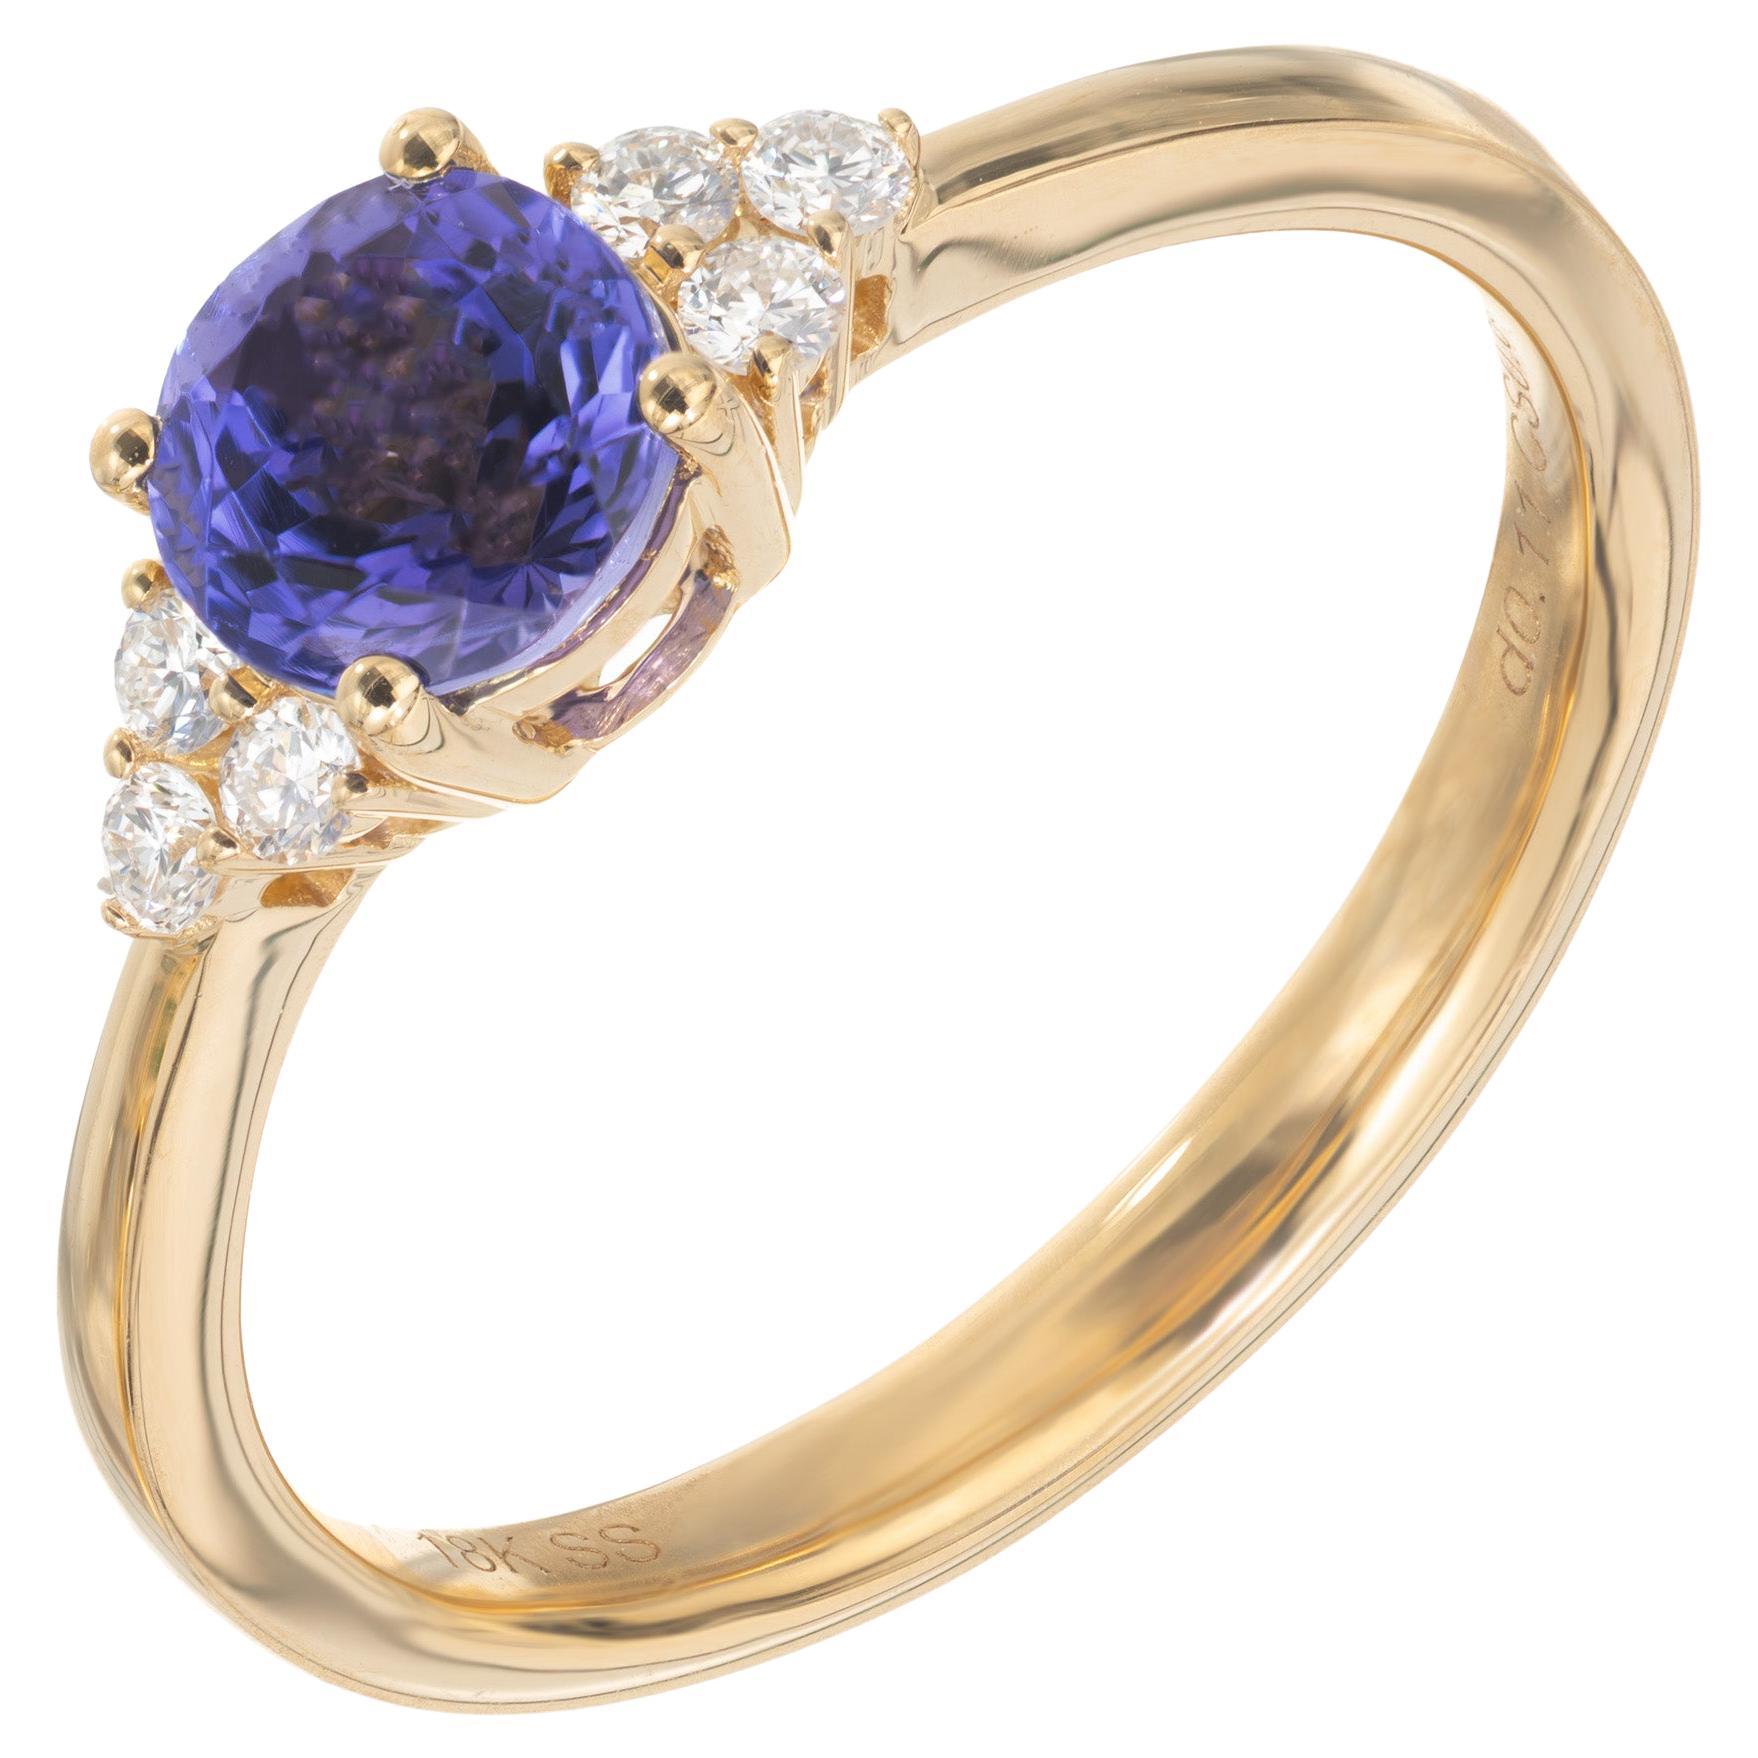 Tanzanite and diamond ring. Beautiful round cut purple and blue .88ct Tanzanite mounted in a simple four prong setting which is accented with 3 round brilliant cut diamond clusters on each shoulder. The setting is 18k yellow gold. Because of its